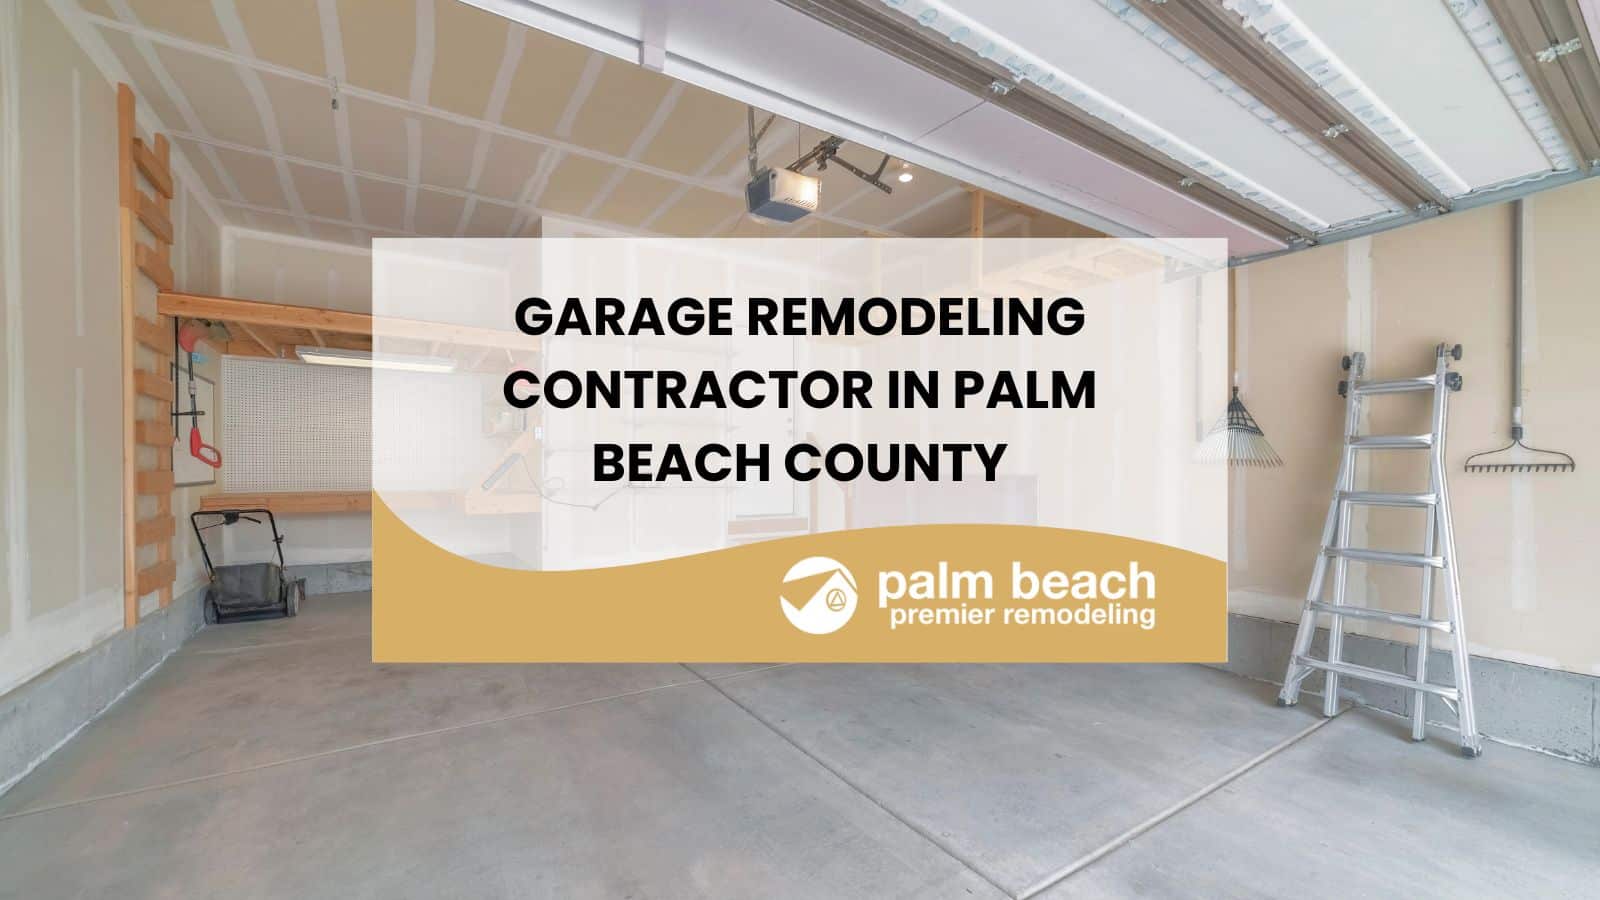 Garage Remodeling Contractor in Palm Beach County